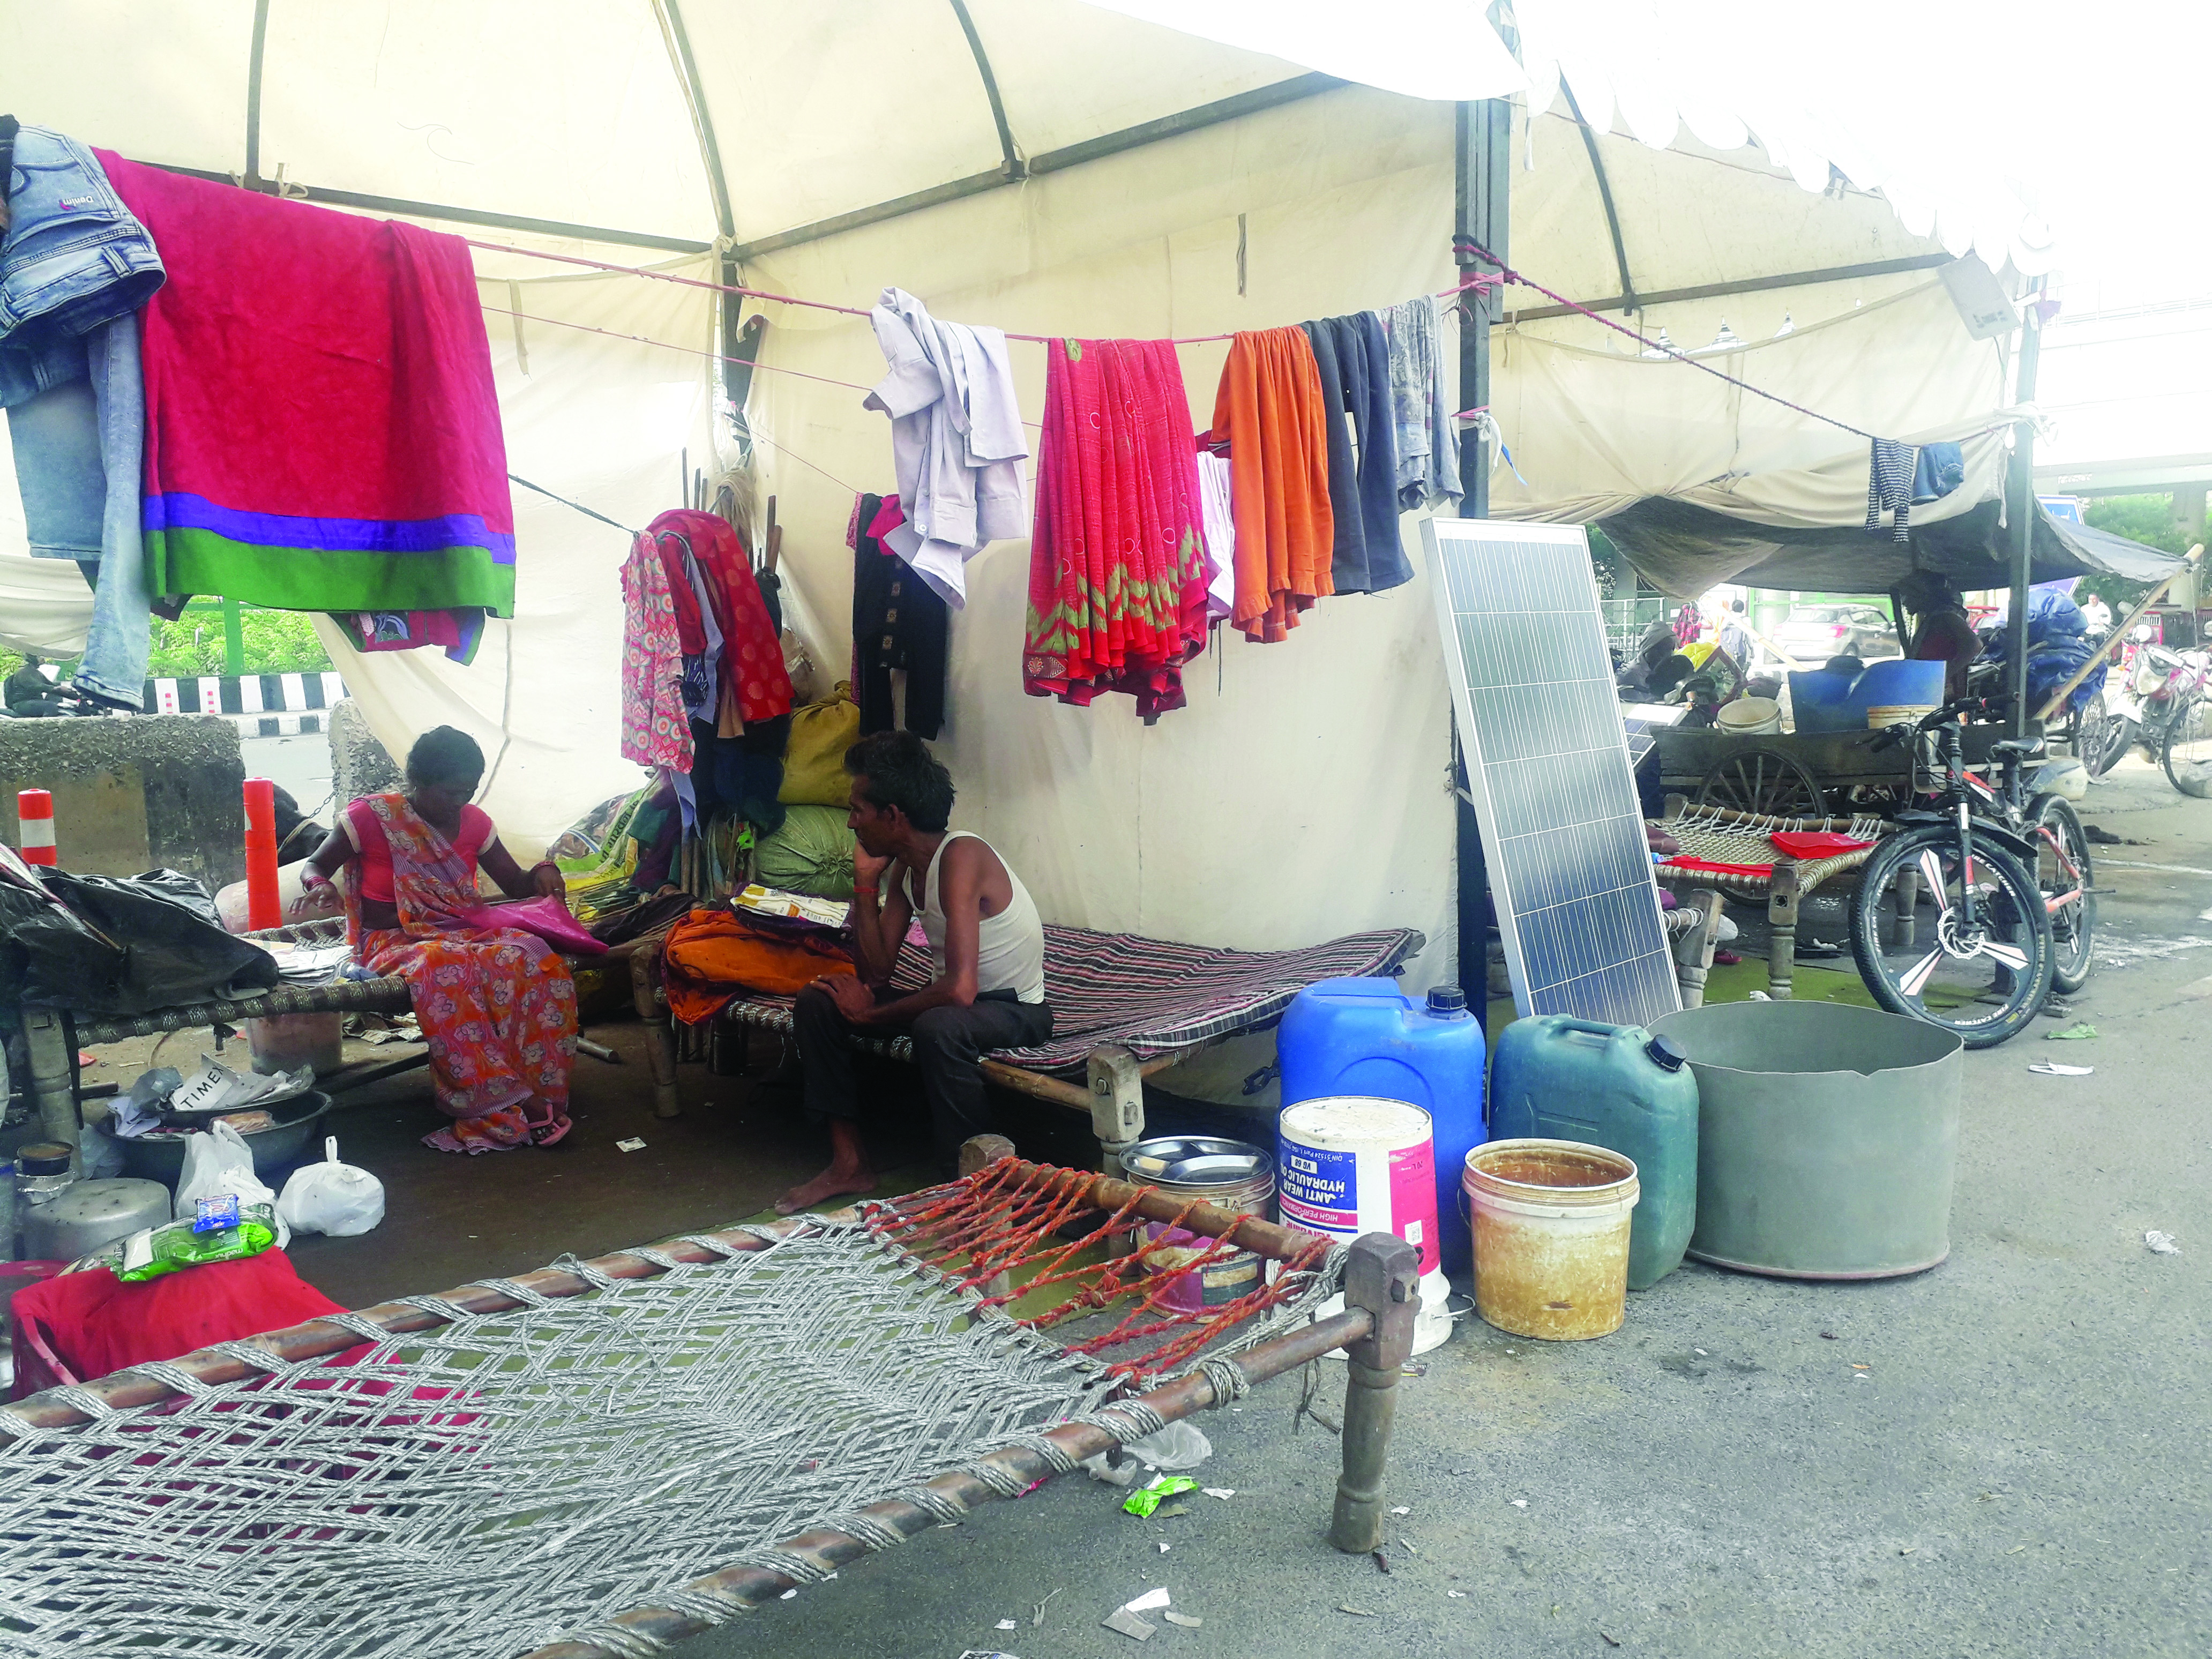 Dire: Flood victims wallow in despair in squalid relief camp